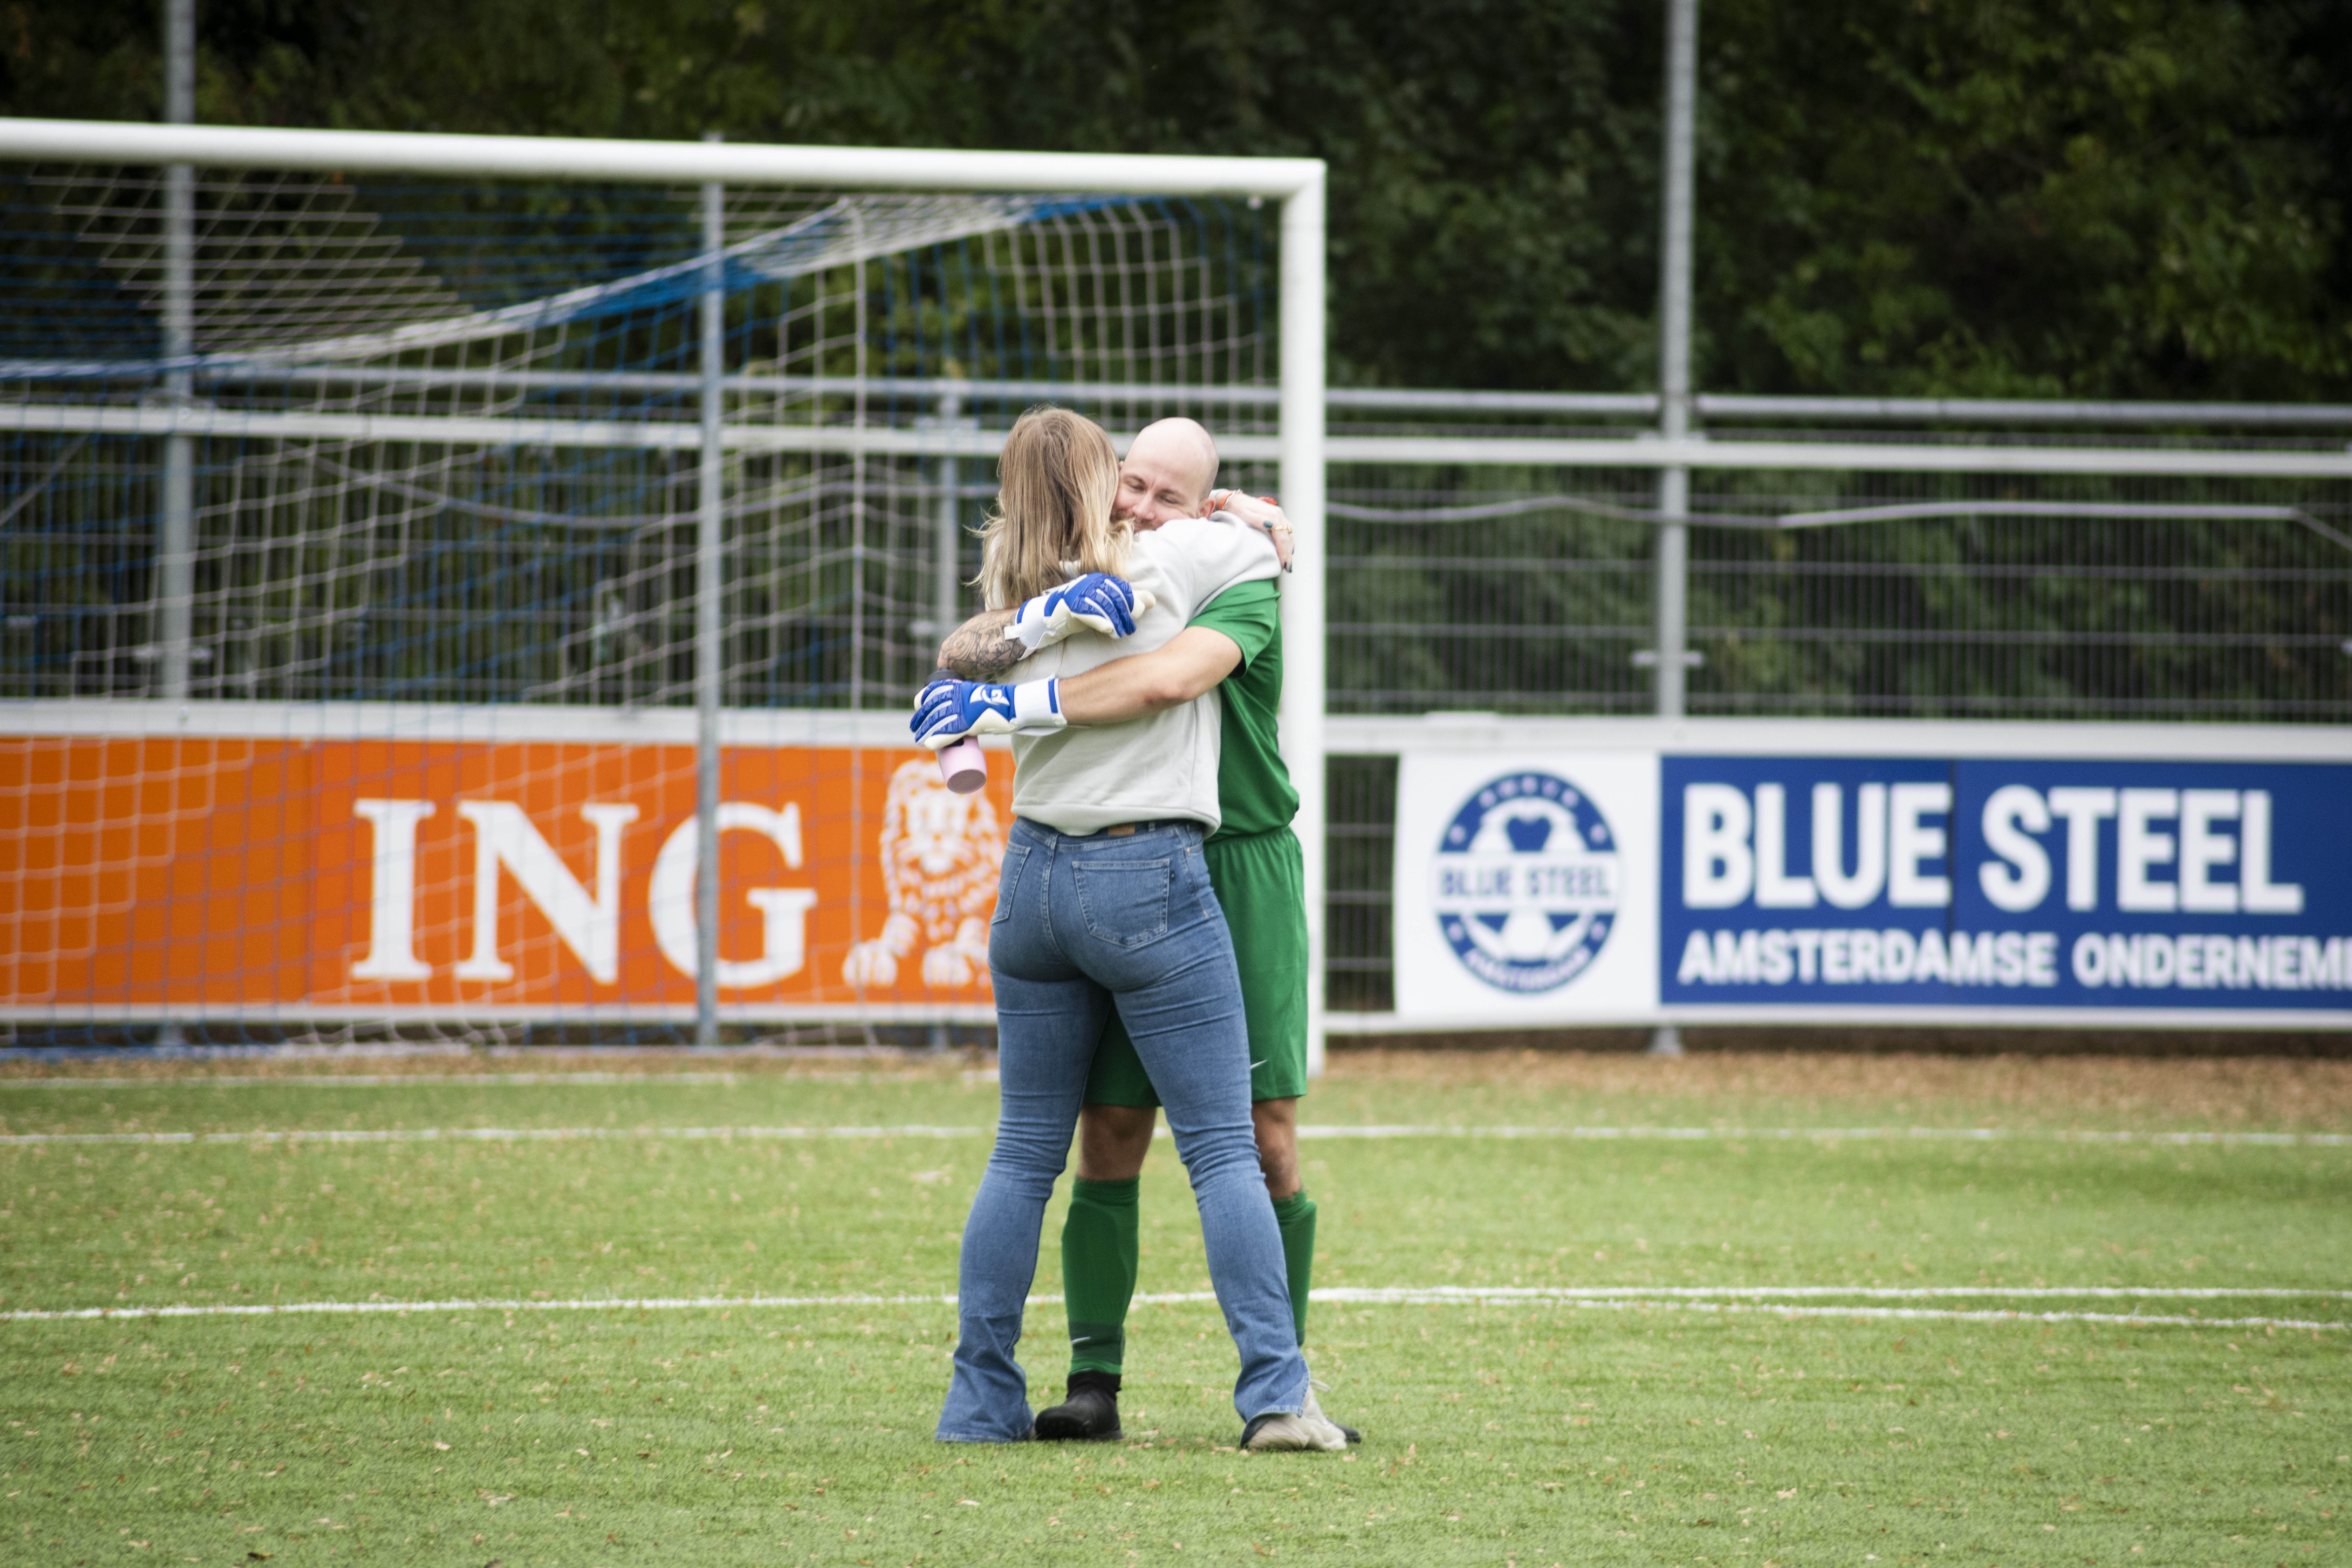 two people hugging on a football field. One wears a green football jersey and the other wear blue jeans and a white jumper. There's an ING blank and Blue steel ad in the background